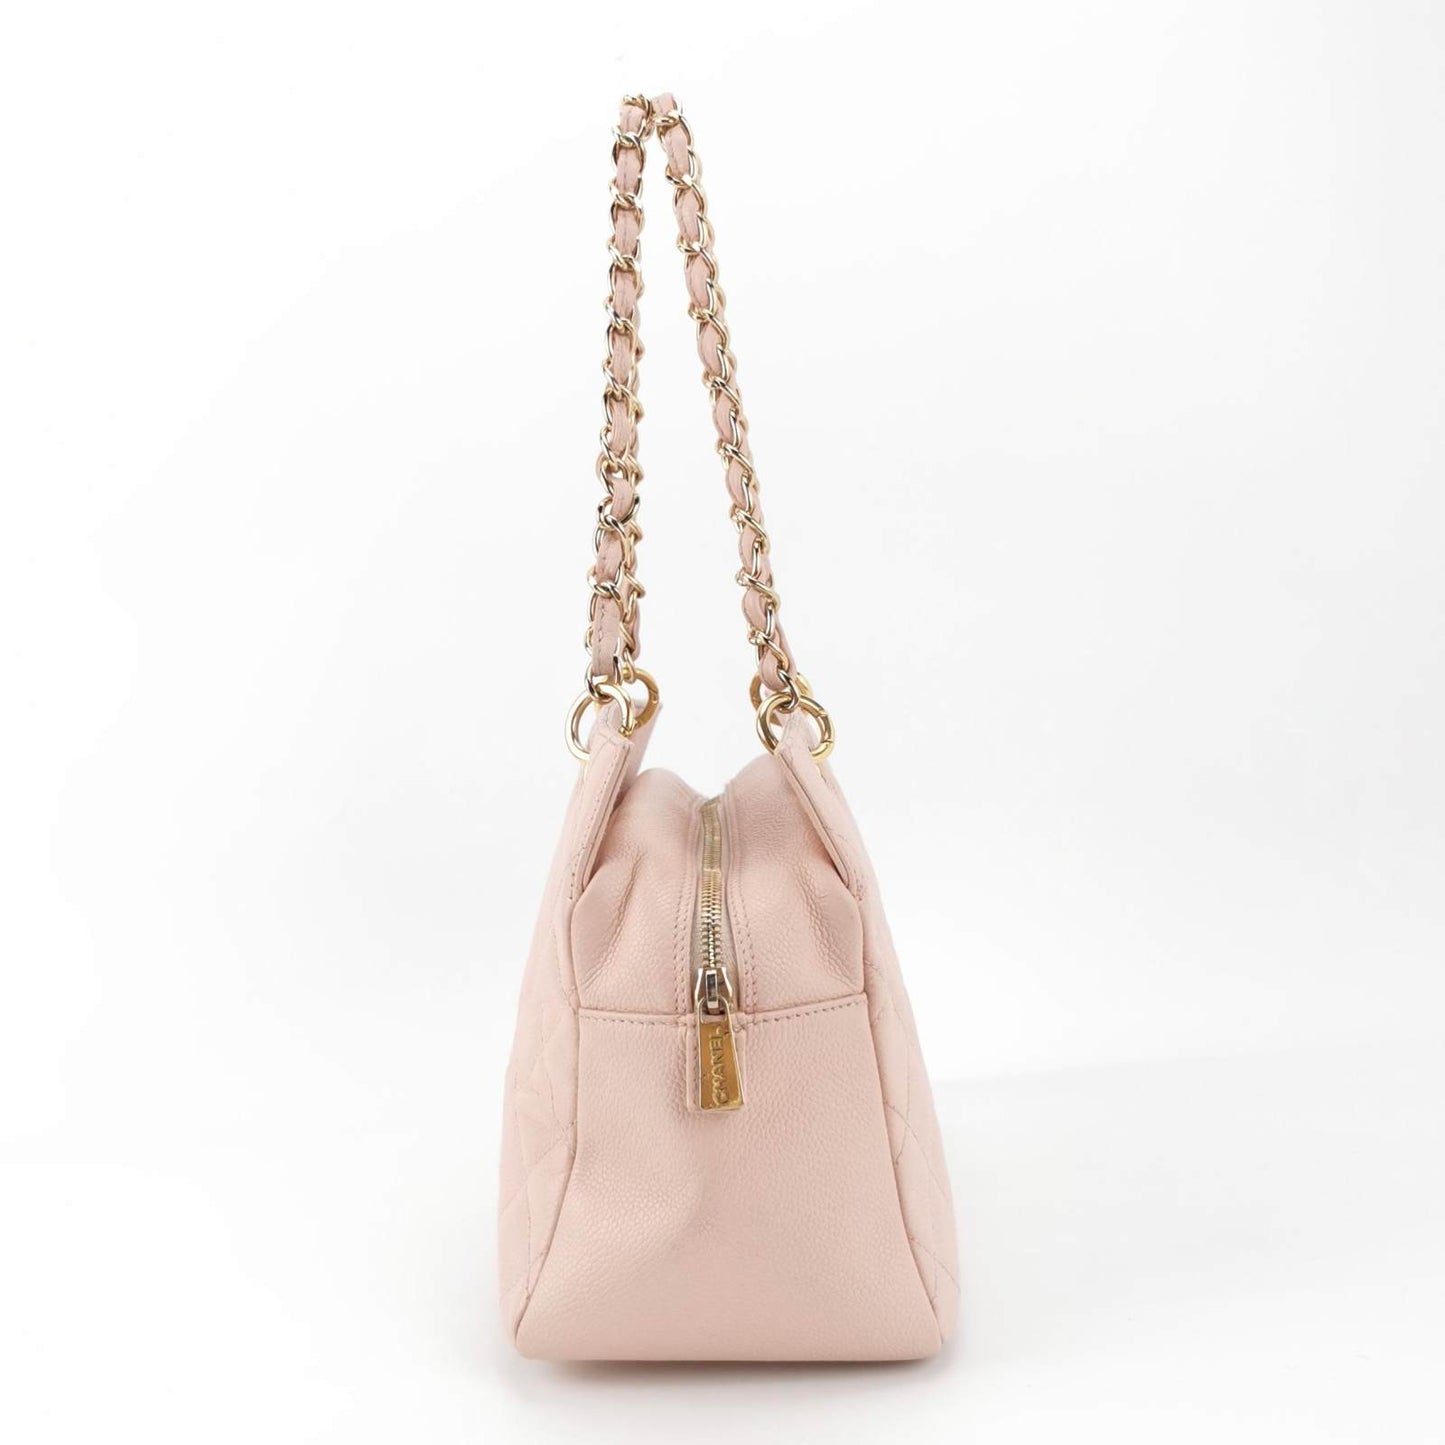 Chanel PST Petite Shopping Tote Pale Pink Caviar Leather Chain Bag